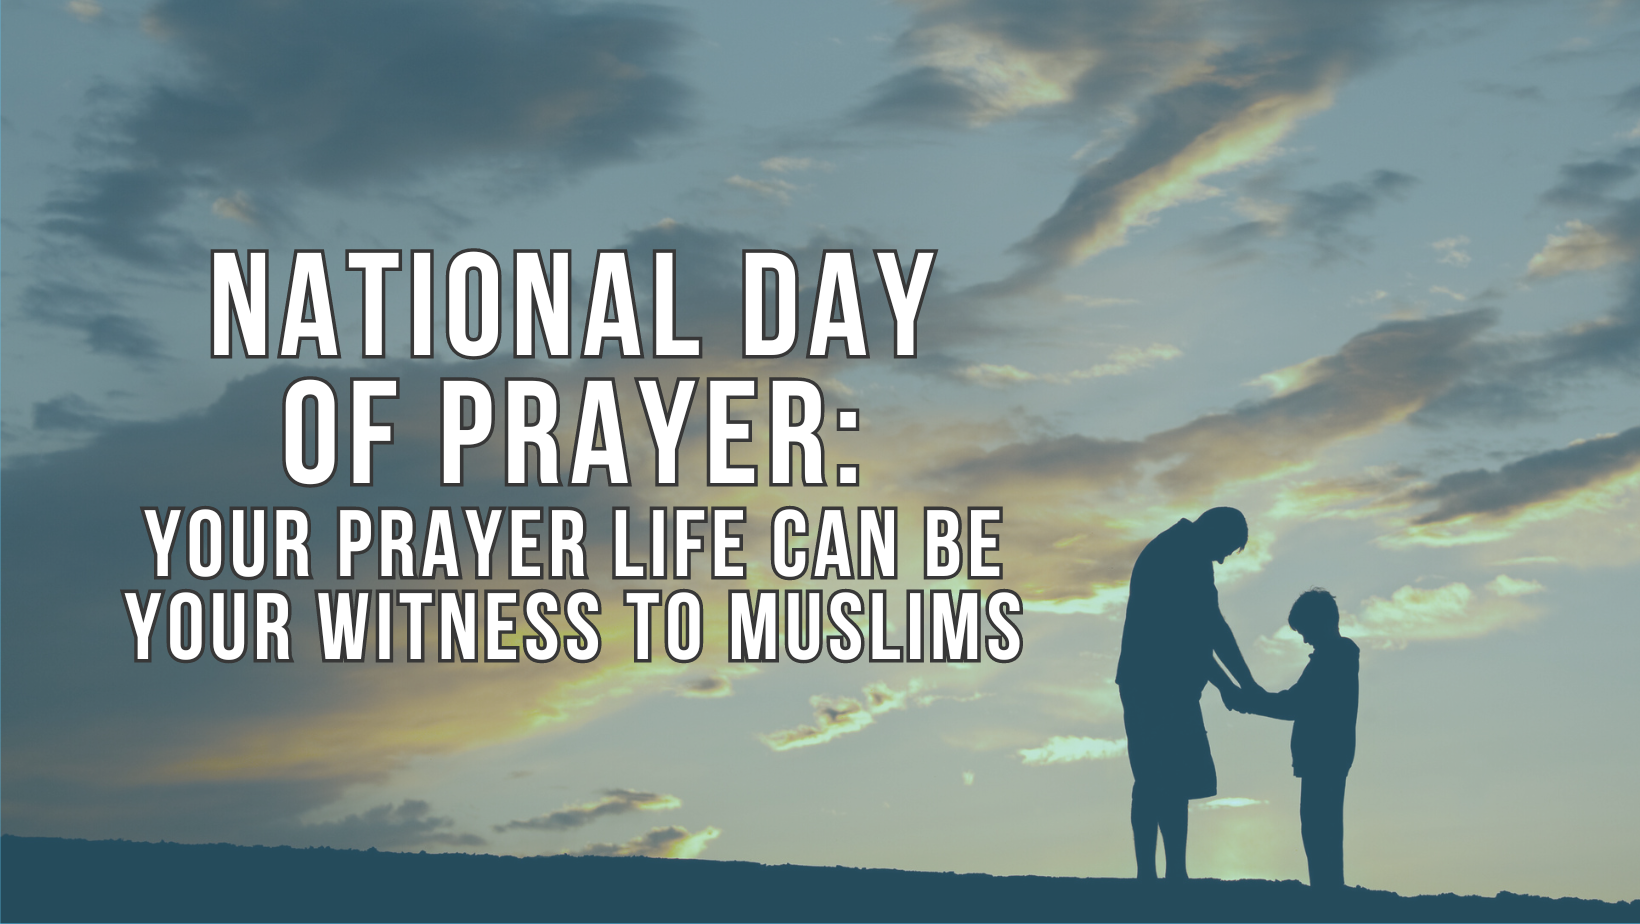 National Day of Prayer: Your prayer life can be your witness to Muslims